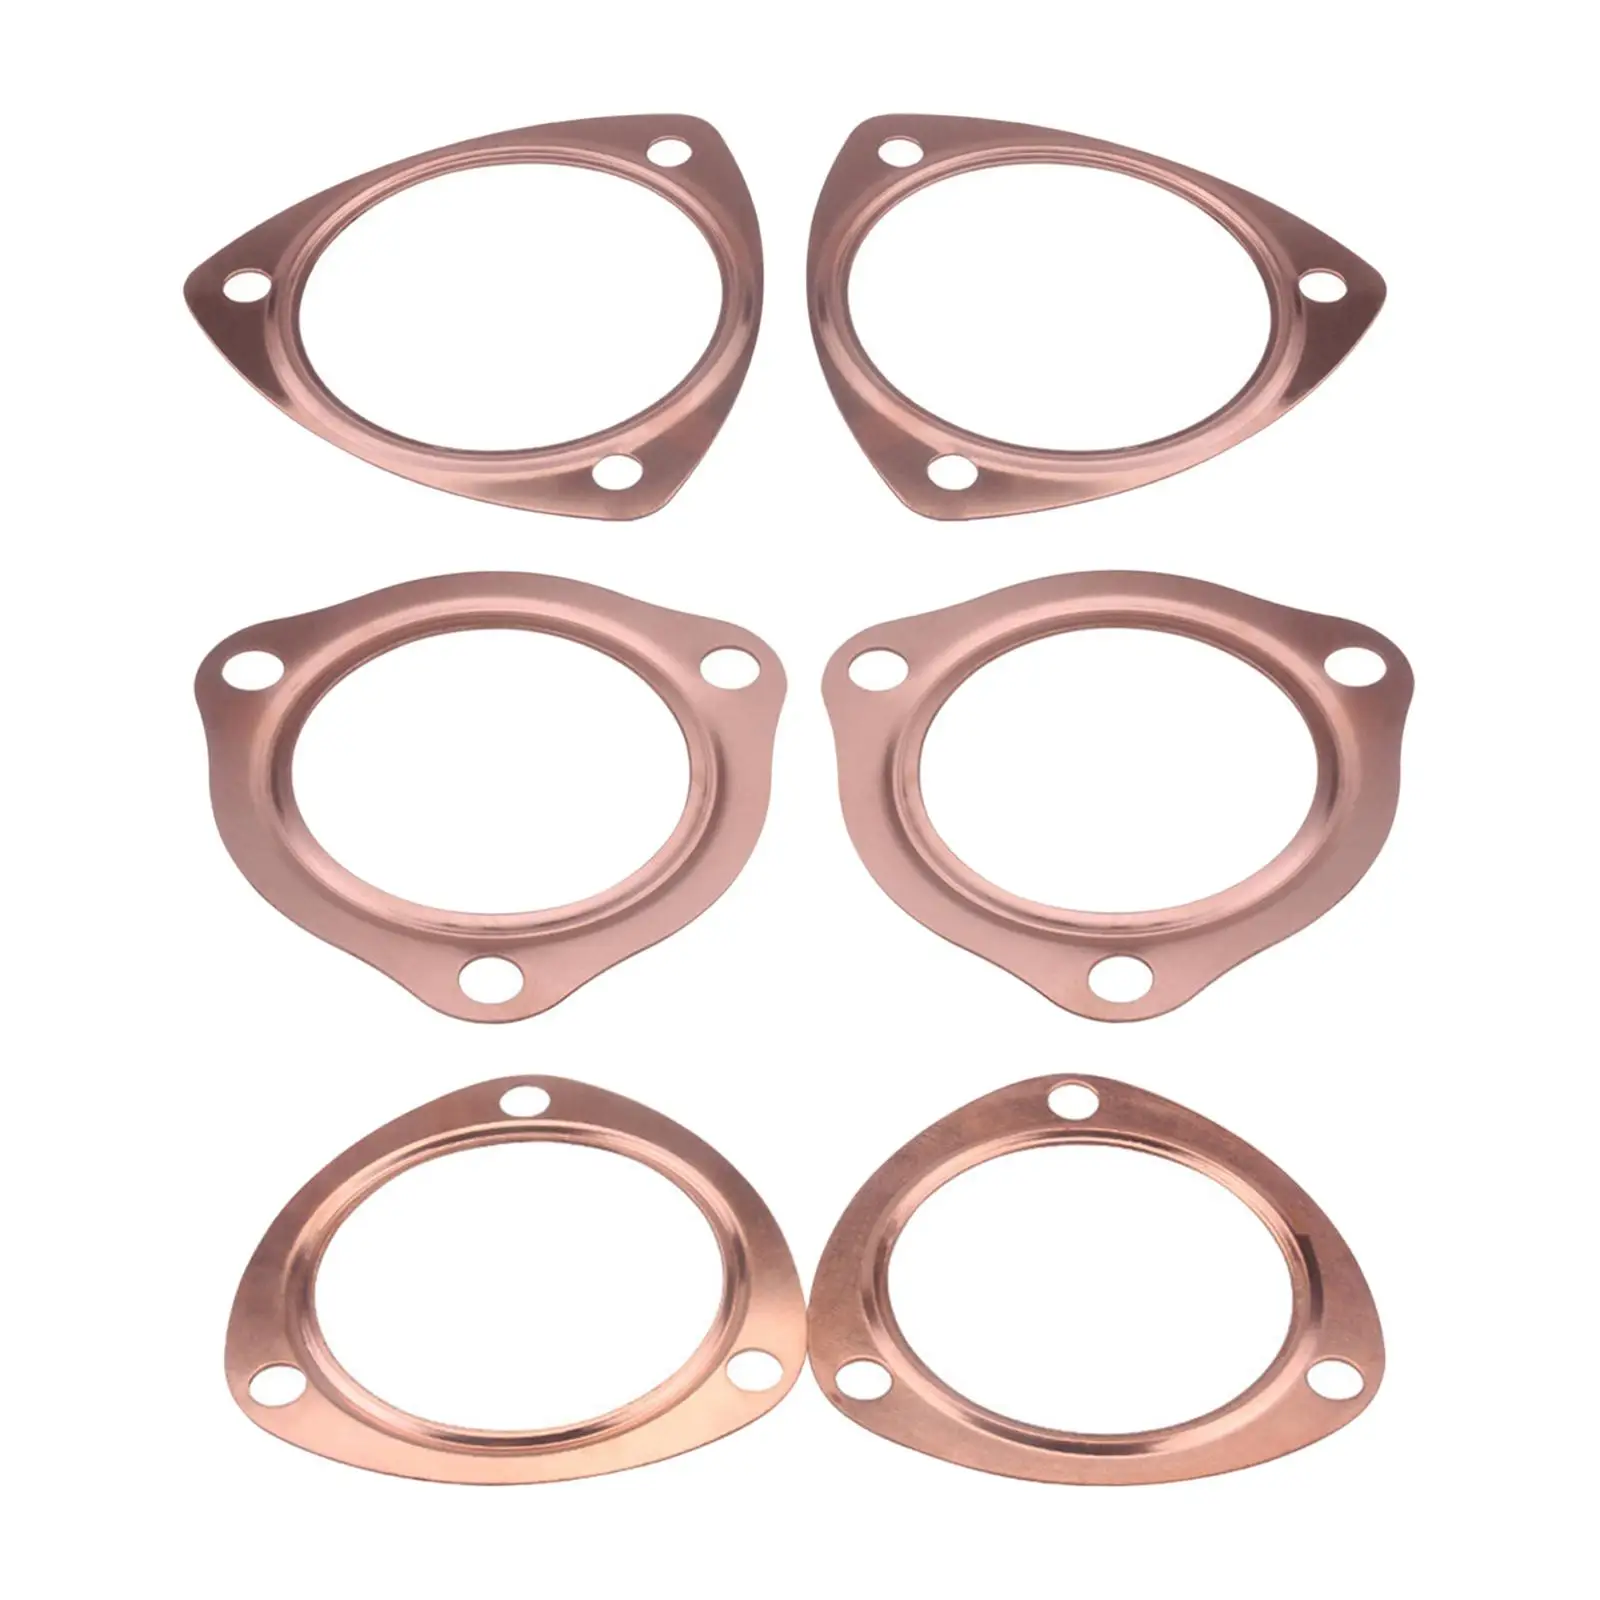 Copper Collector Gasket Copper Header Exhaust Collector Gaskets for Sbc 302 350 454